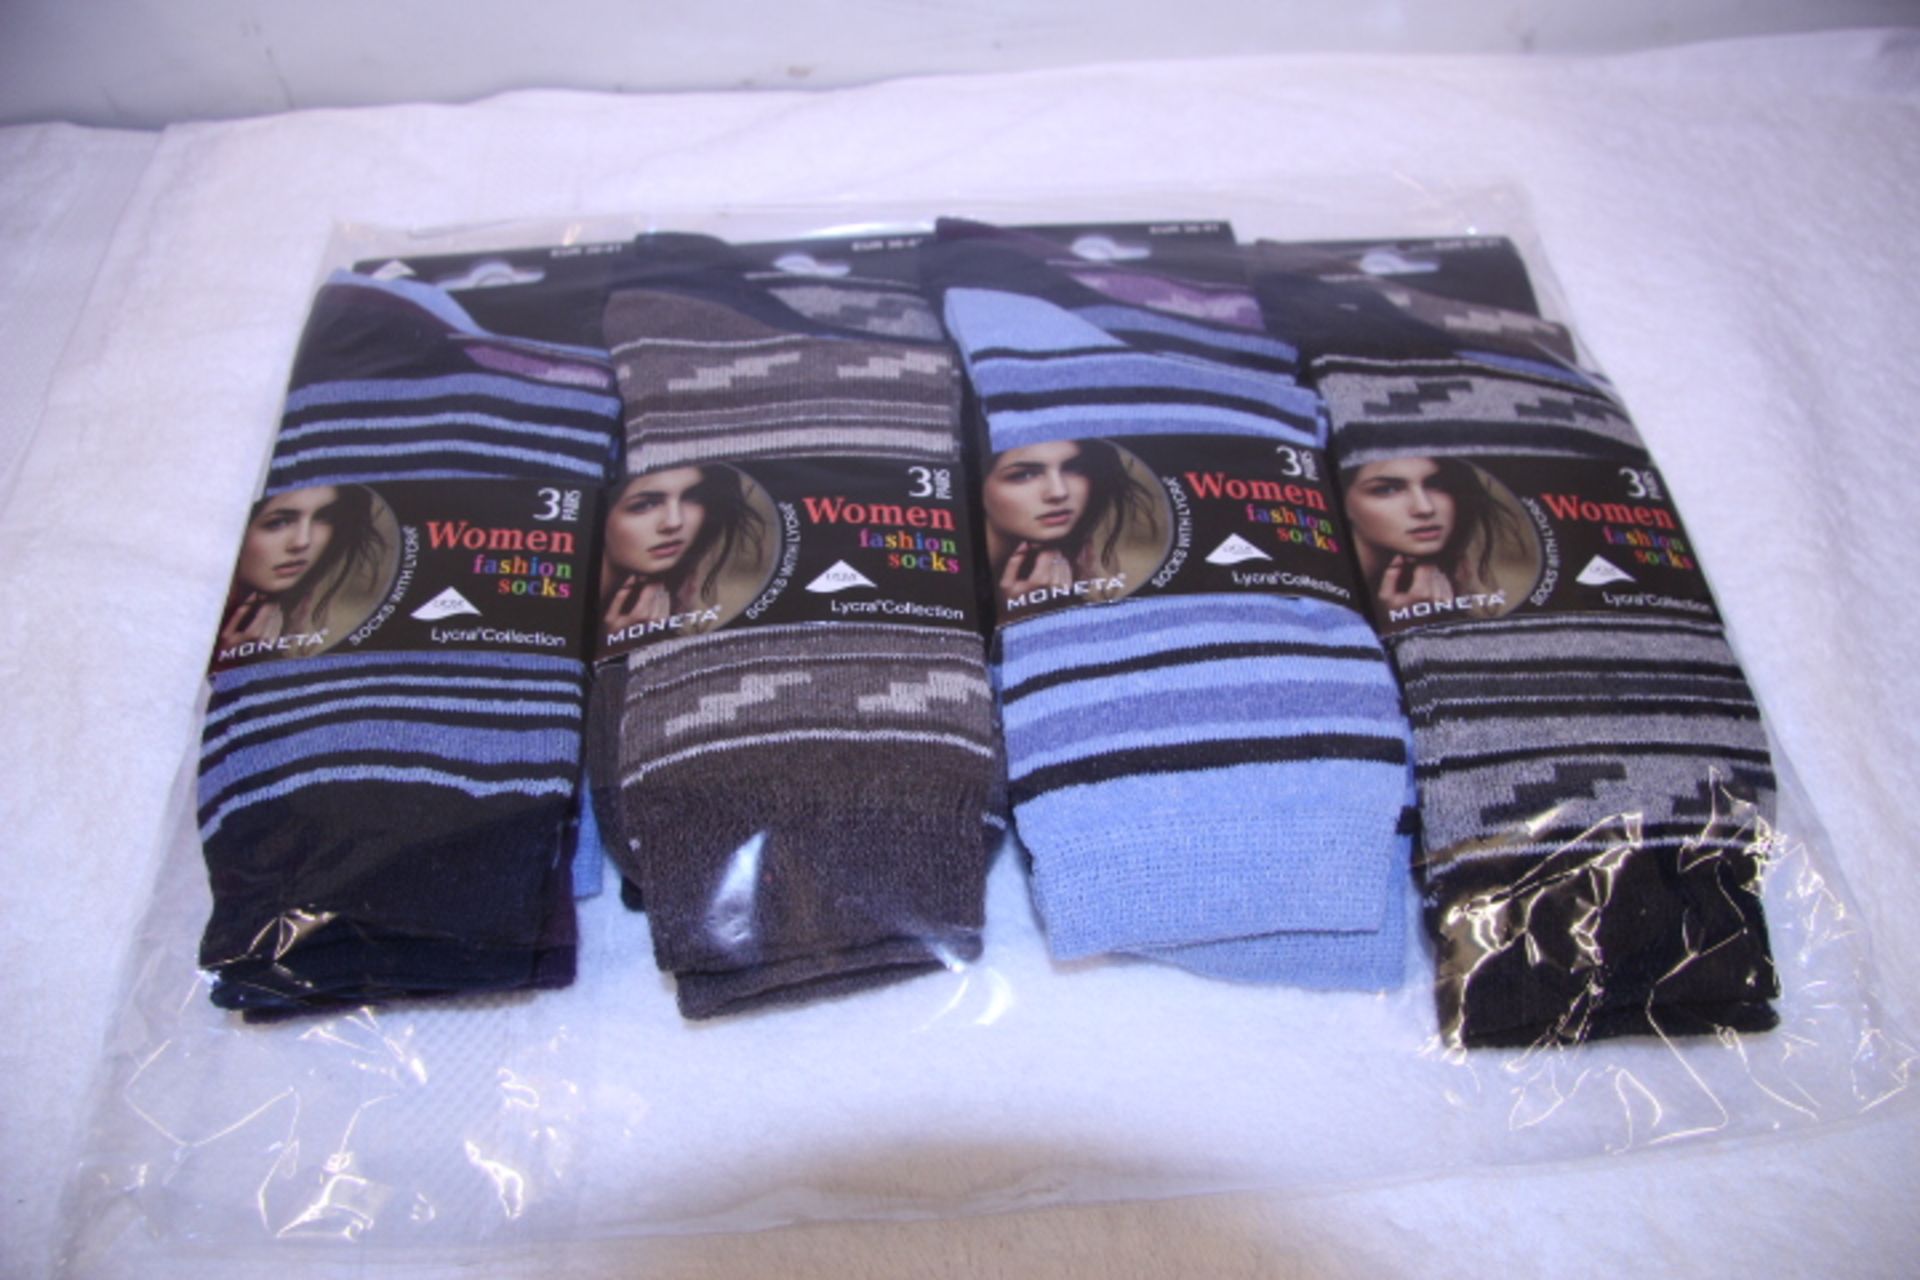 V *TRADE QTY* Brand New A Lot of Twelve Pairs Ladies Fashion Socks (Designs May Vary) - ISP £16. - Image 3 of 3